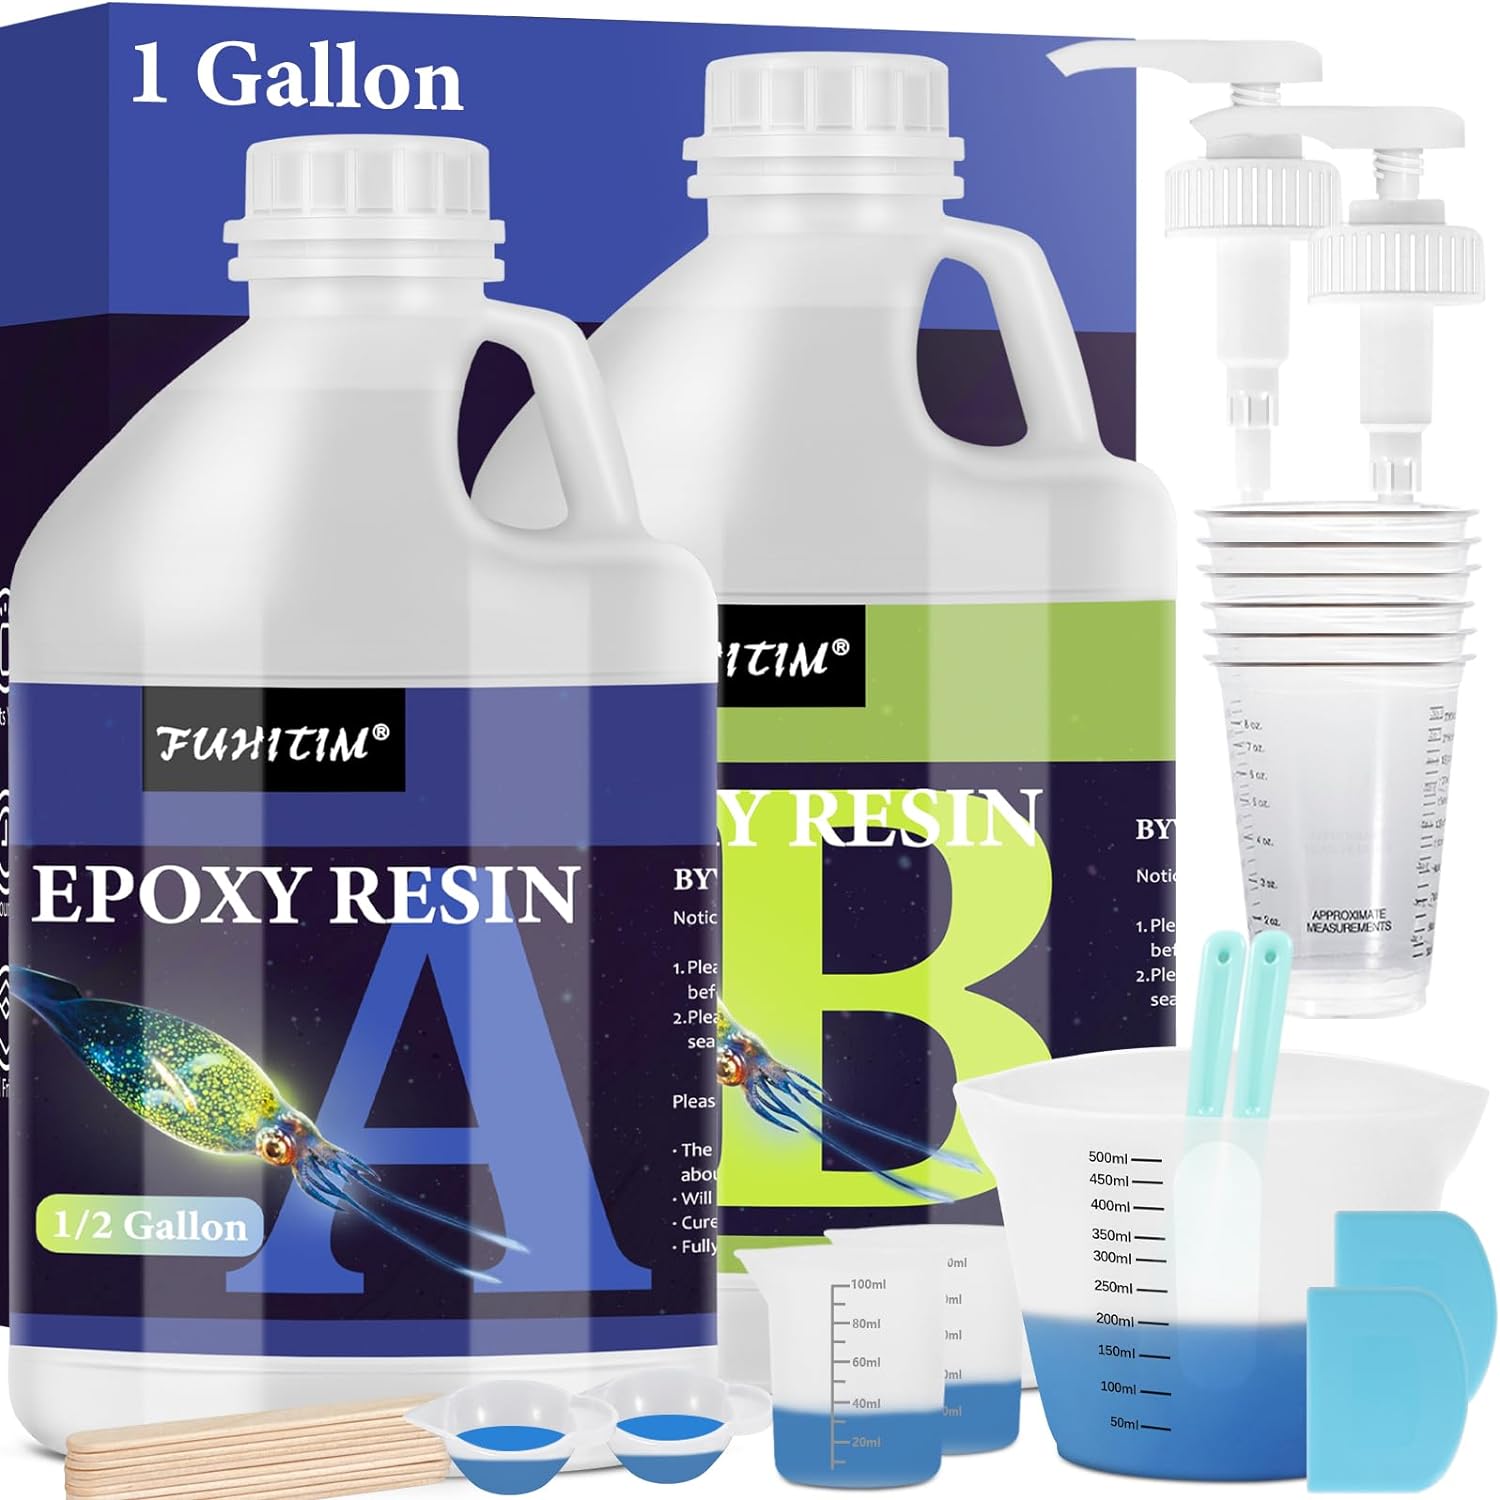 FUHITIM Epoxy Resin 1 Gallon - Crystal Clear Epoxy Resin Kit -  Self-Leveling, High-Glossy, No Yellowing, No Bubbles Casting Resin Perfect  for Crafts, Table Tops, DIY 1:1 Ratio